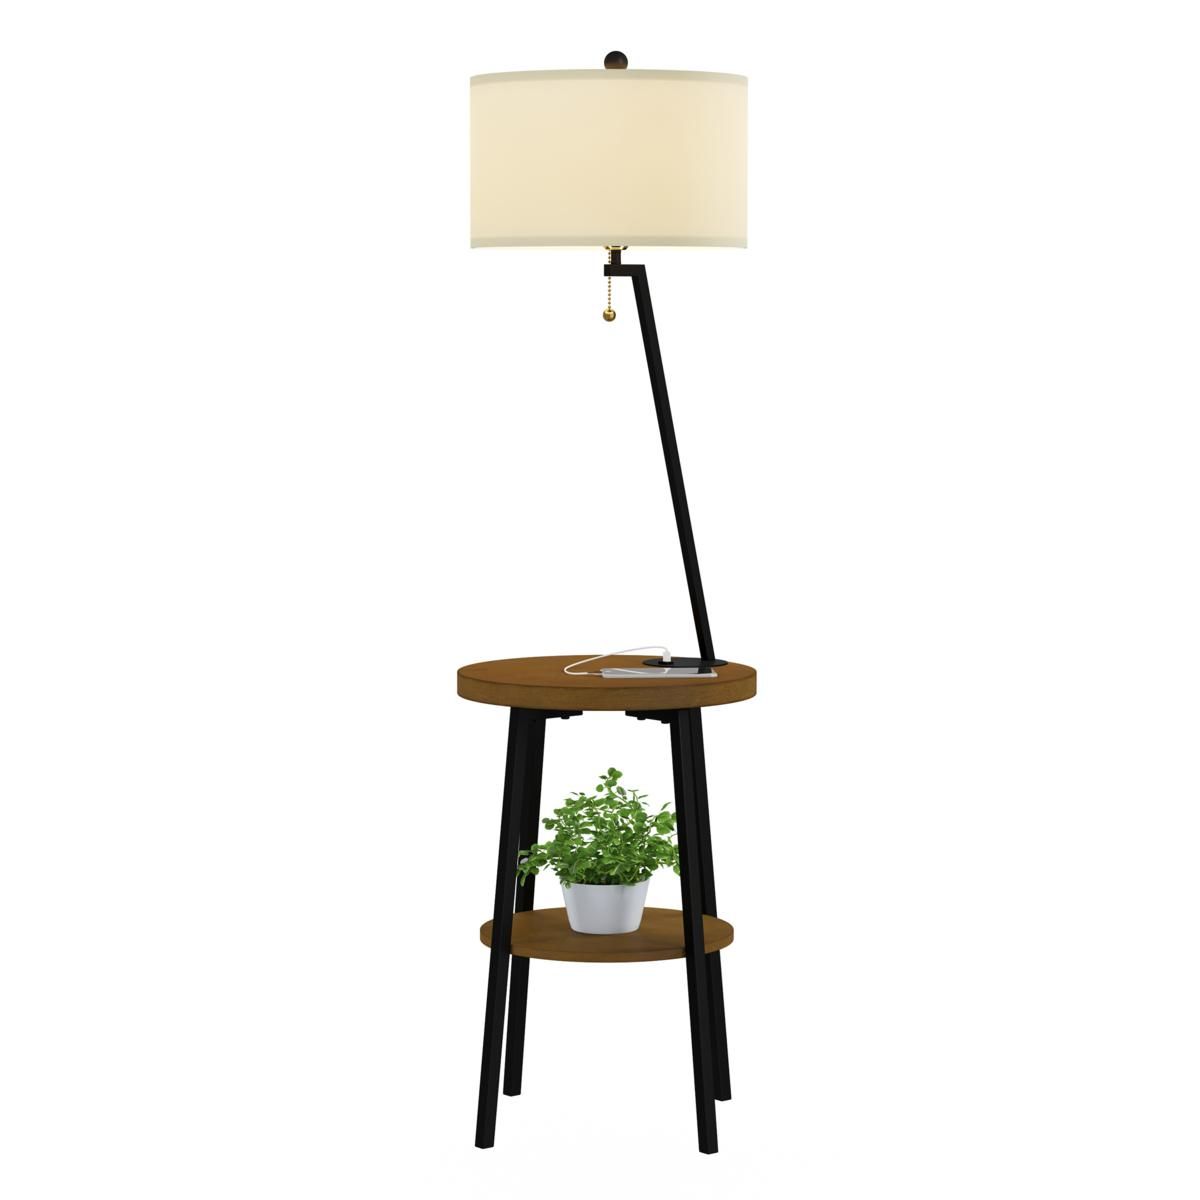 Hastings Home 2 Tier End Table Floor Lamp With Usb Port  Black & Brown –  20434415 | Hsn In Floor Lamps With 2 Tier Table (View 11 of 15)